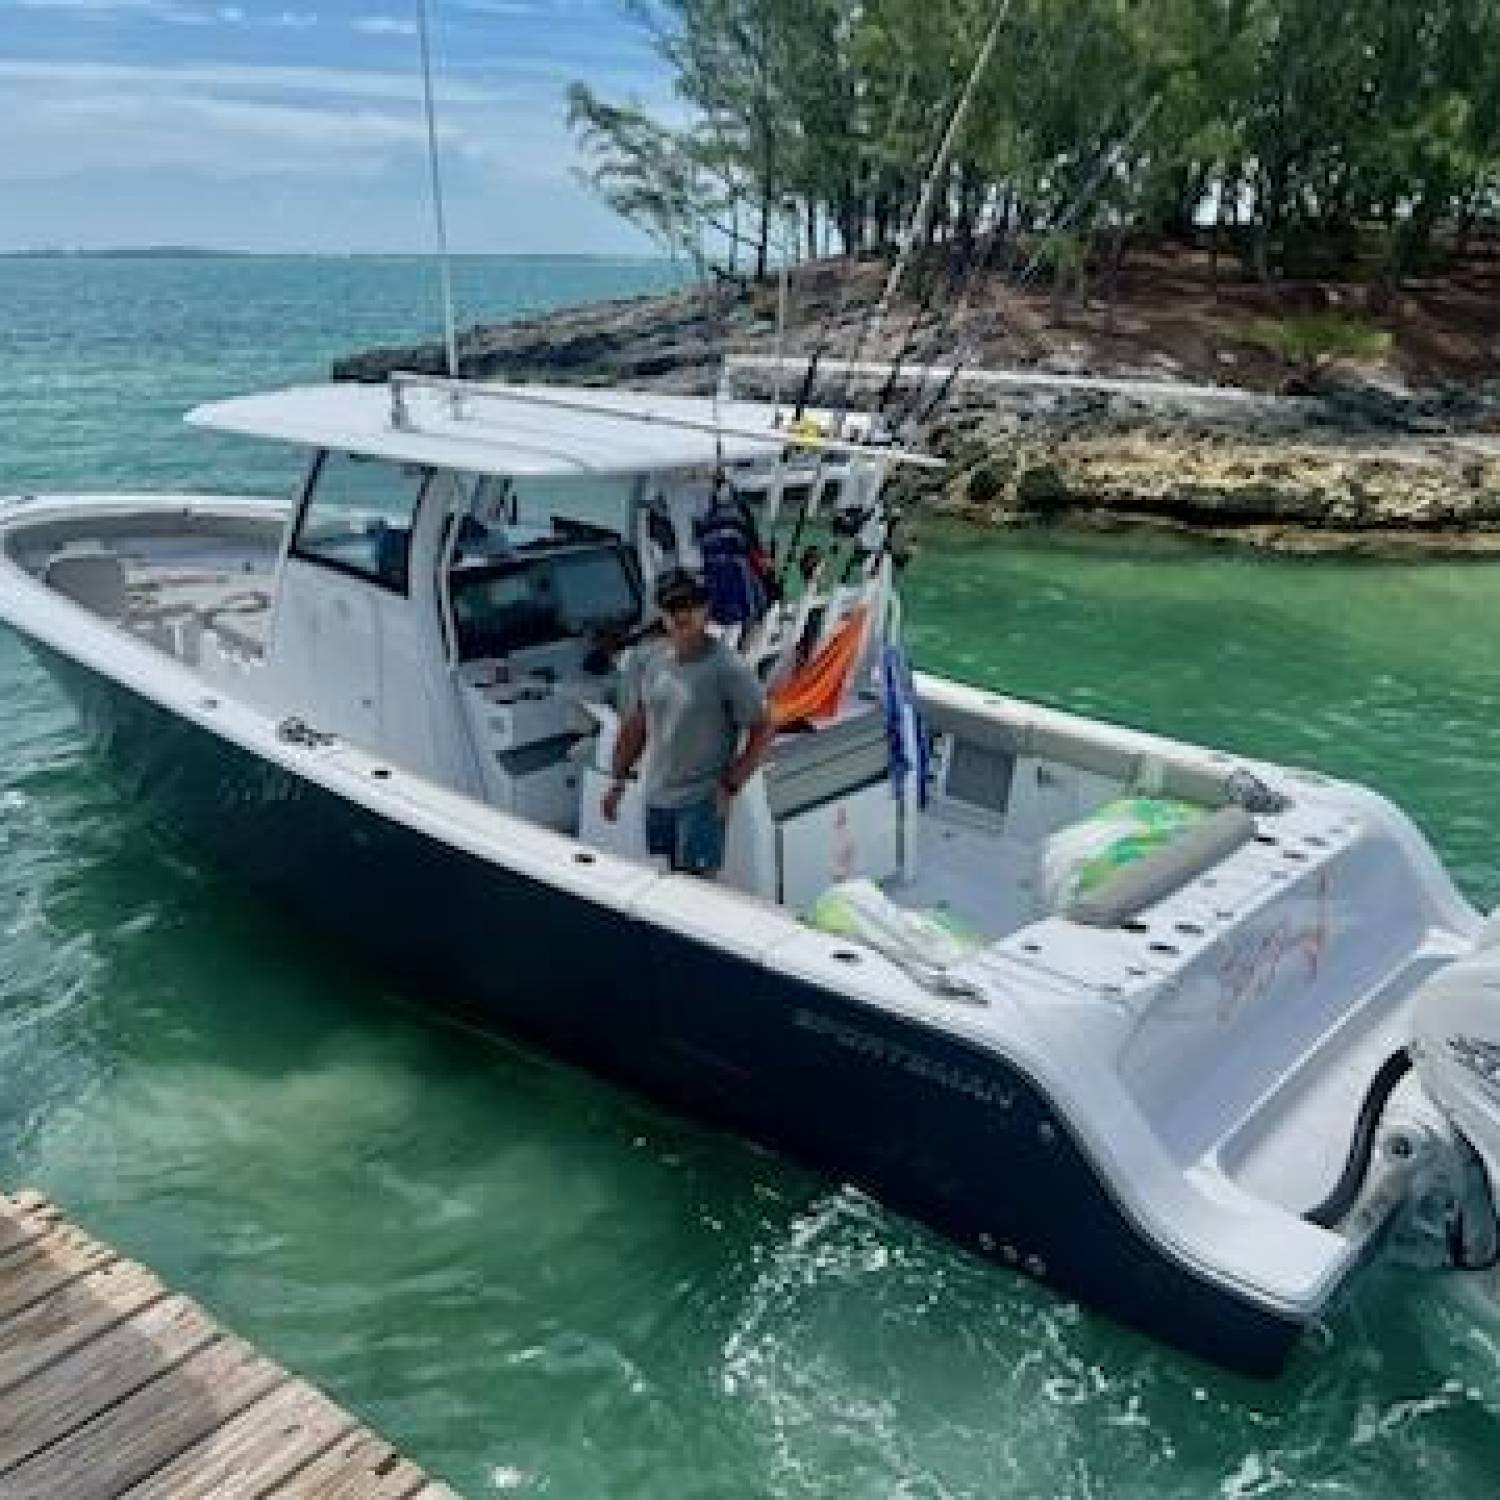 Title: Leaving Harbour island Bahamas for Miami - On board their Sportsman Open 352 Center Console - Location: Harbour Island Eluethera Bahamas. Participating in the Photo Contest #SportsmanJuly2023